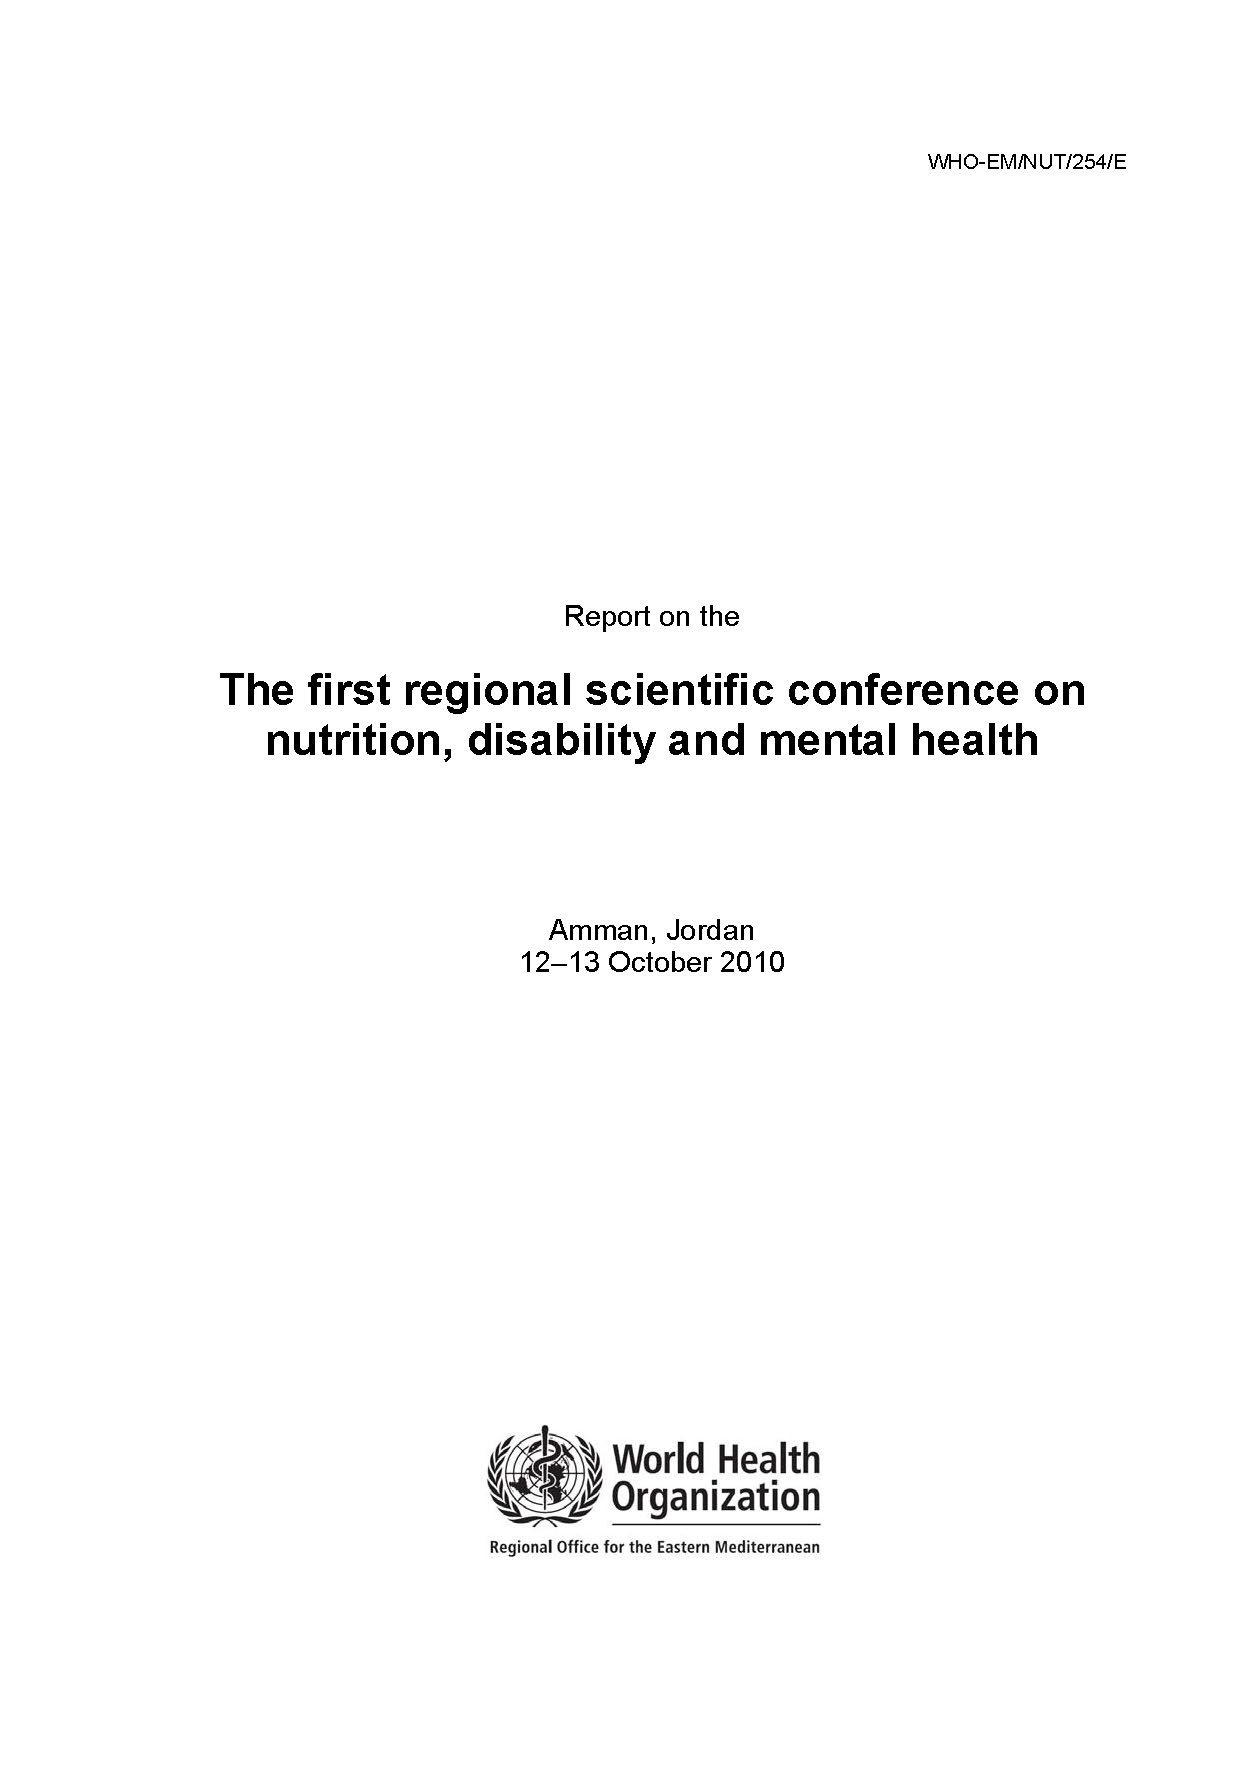 report_on_the_first_regional_scientific_conference_on_nutrition_disability_and_mental_health